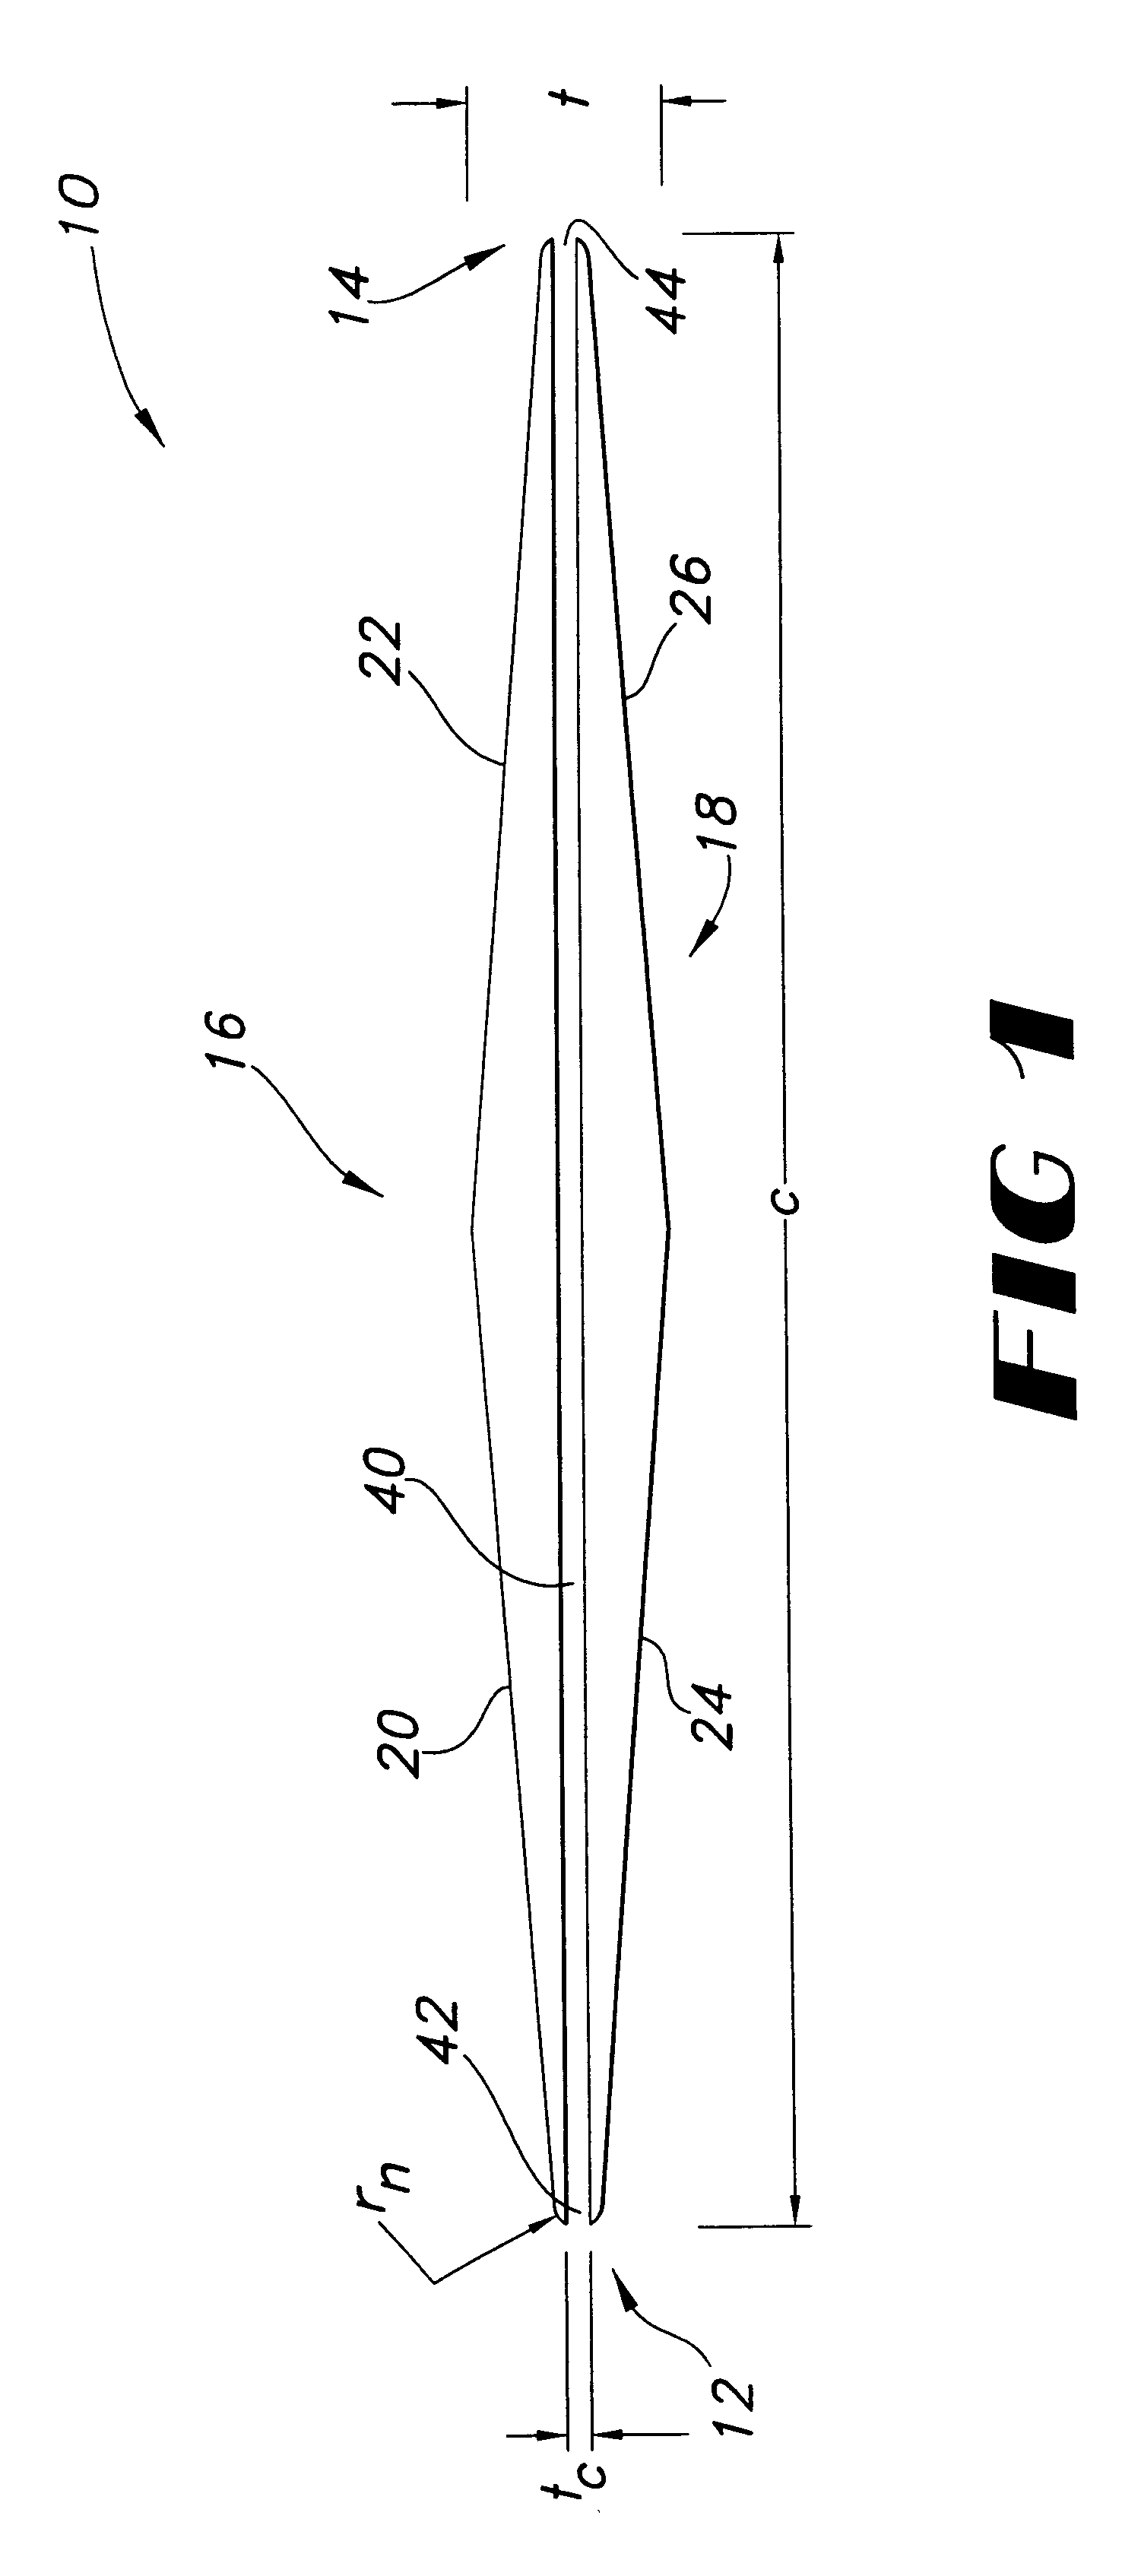 Leading edge channel for enhancement of lift/drag ratio and reduction of sonic boom